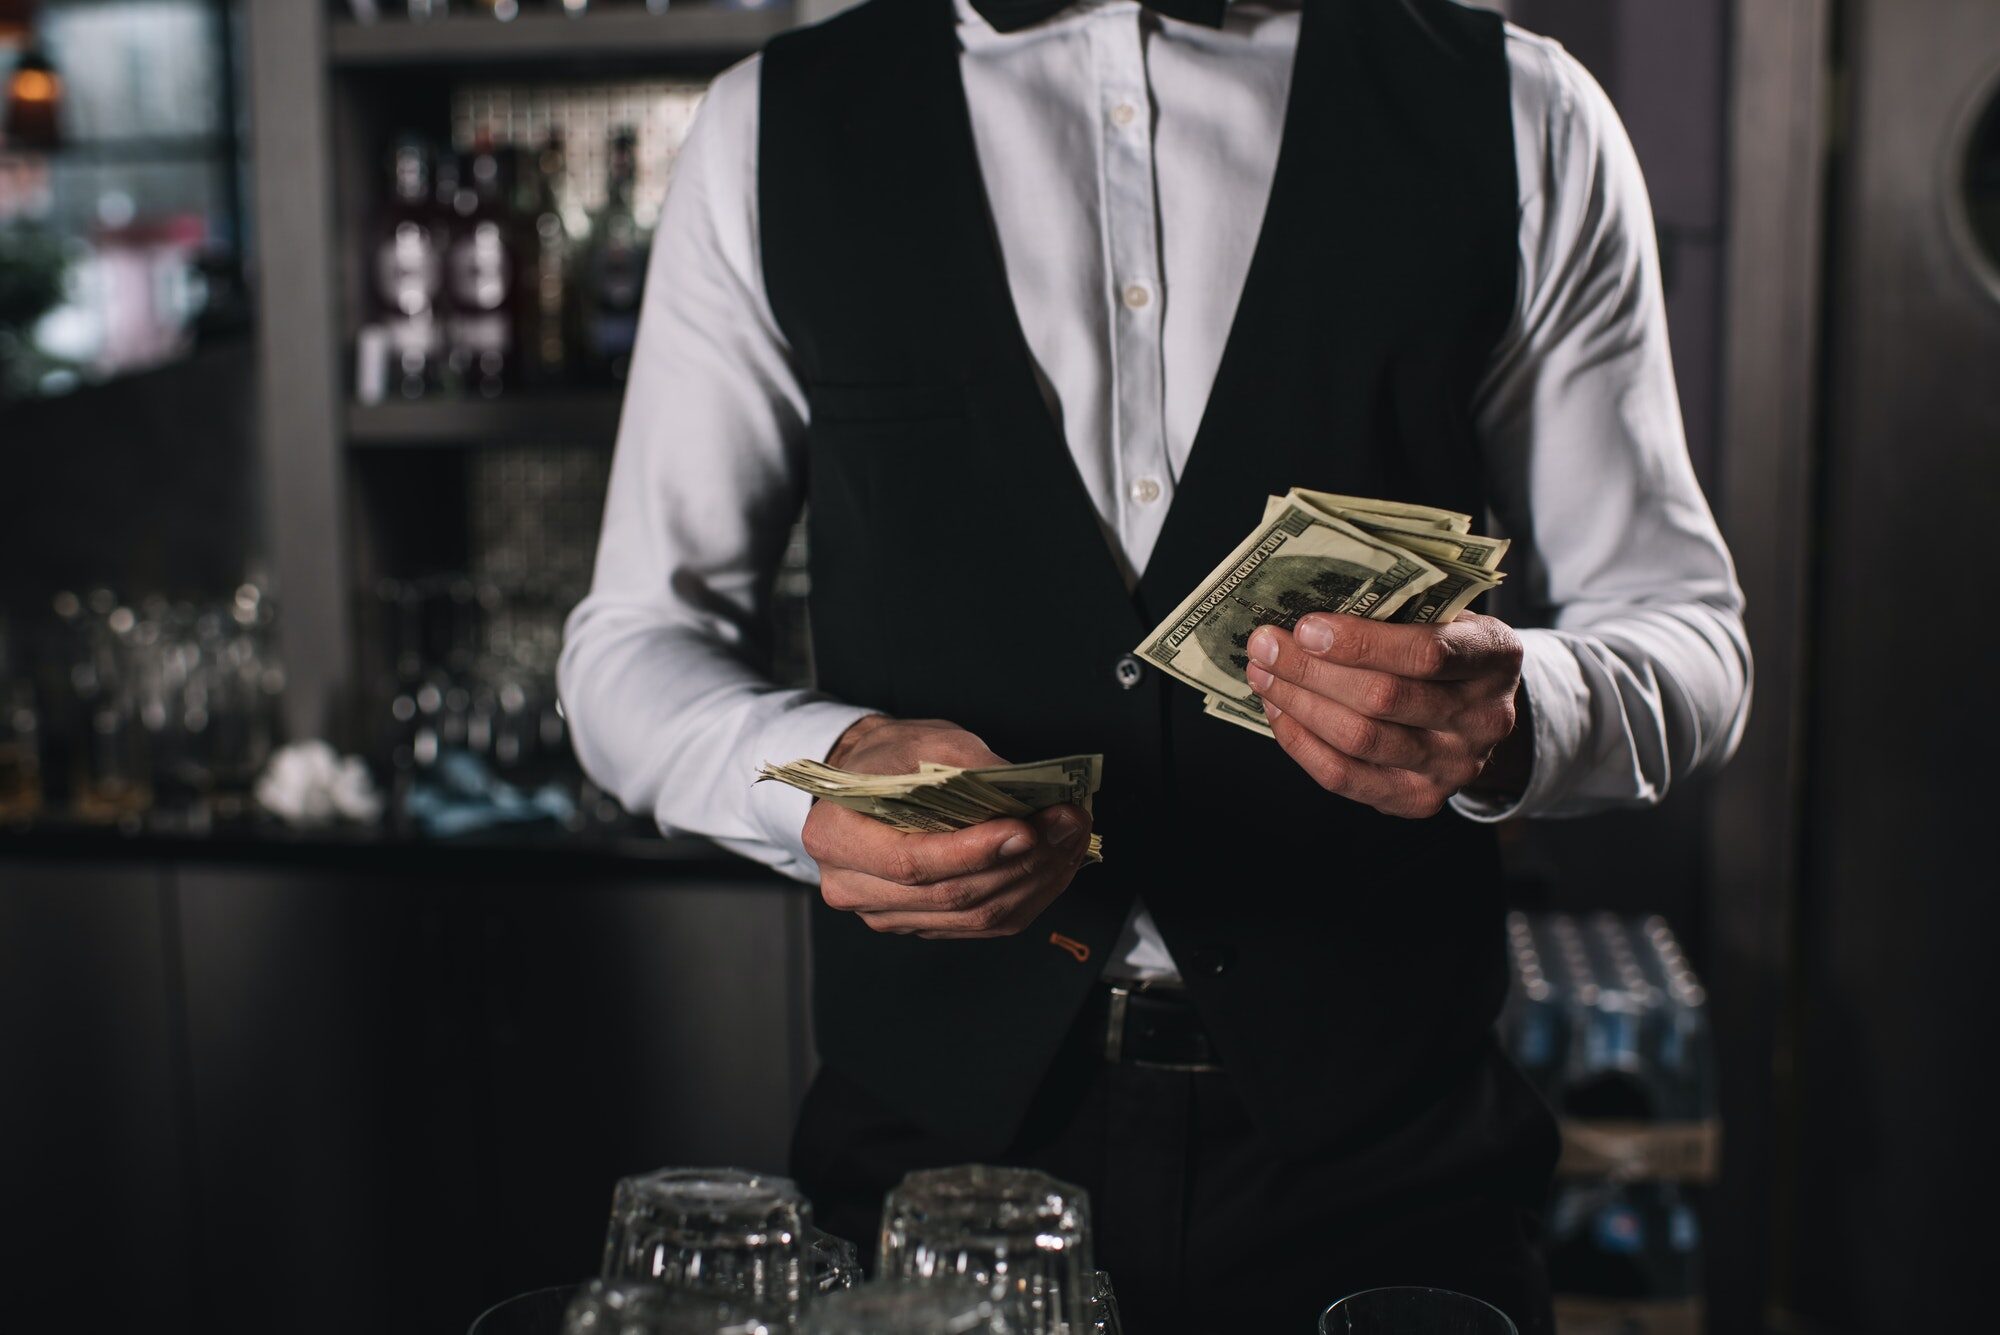 bartender counting tips